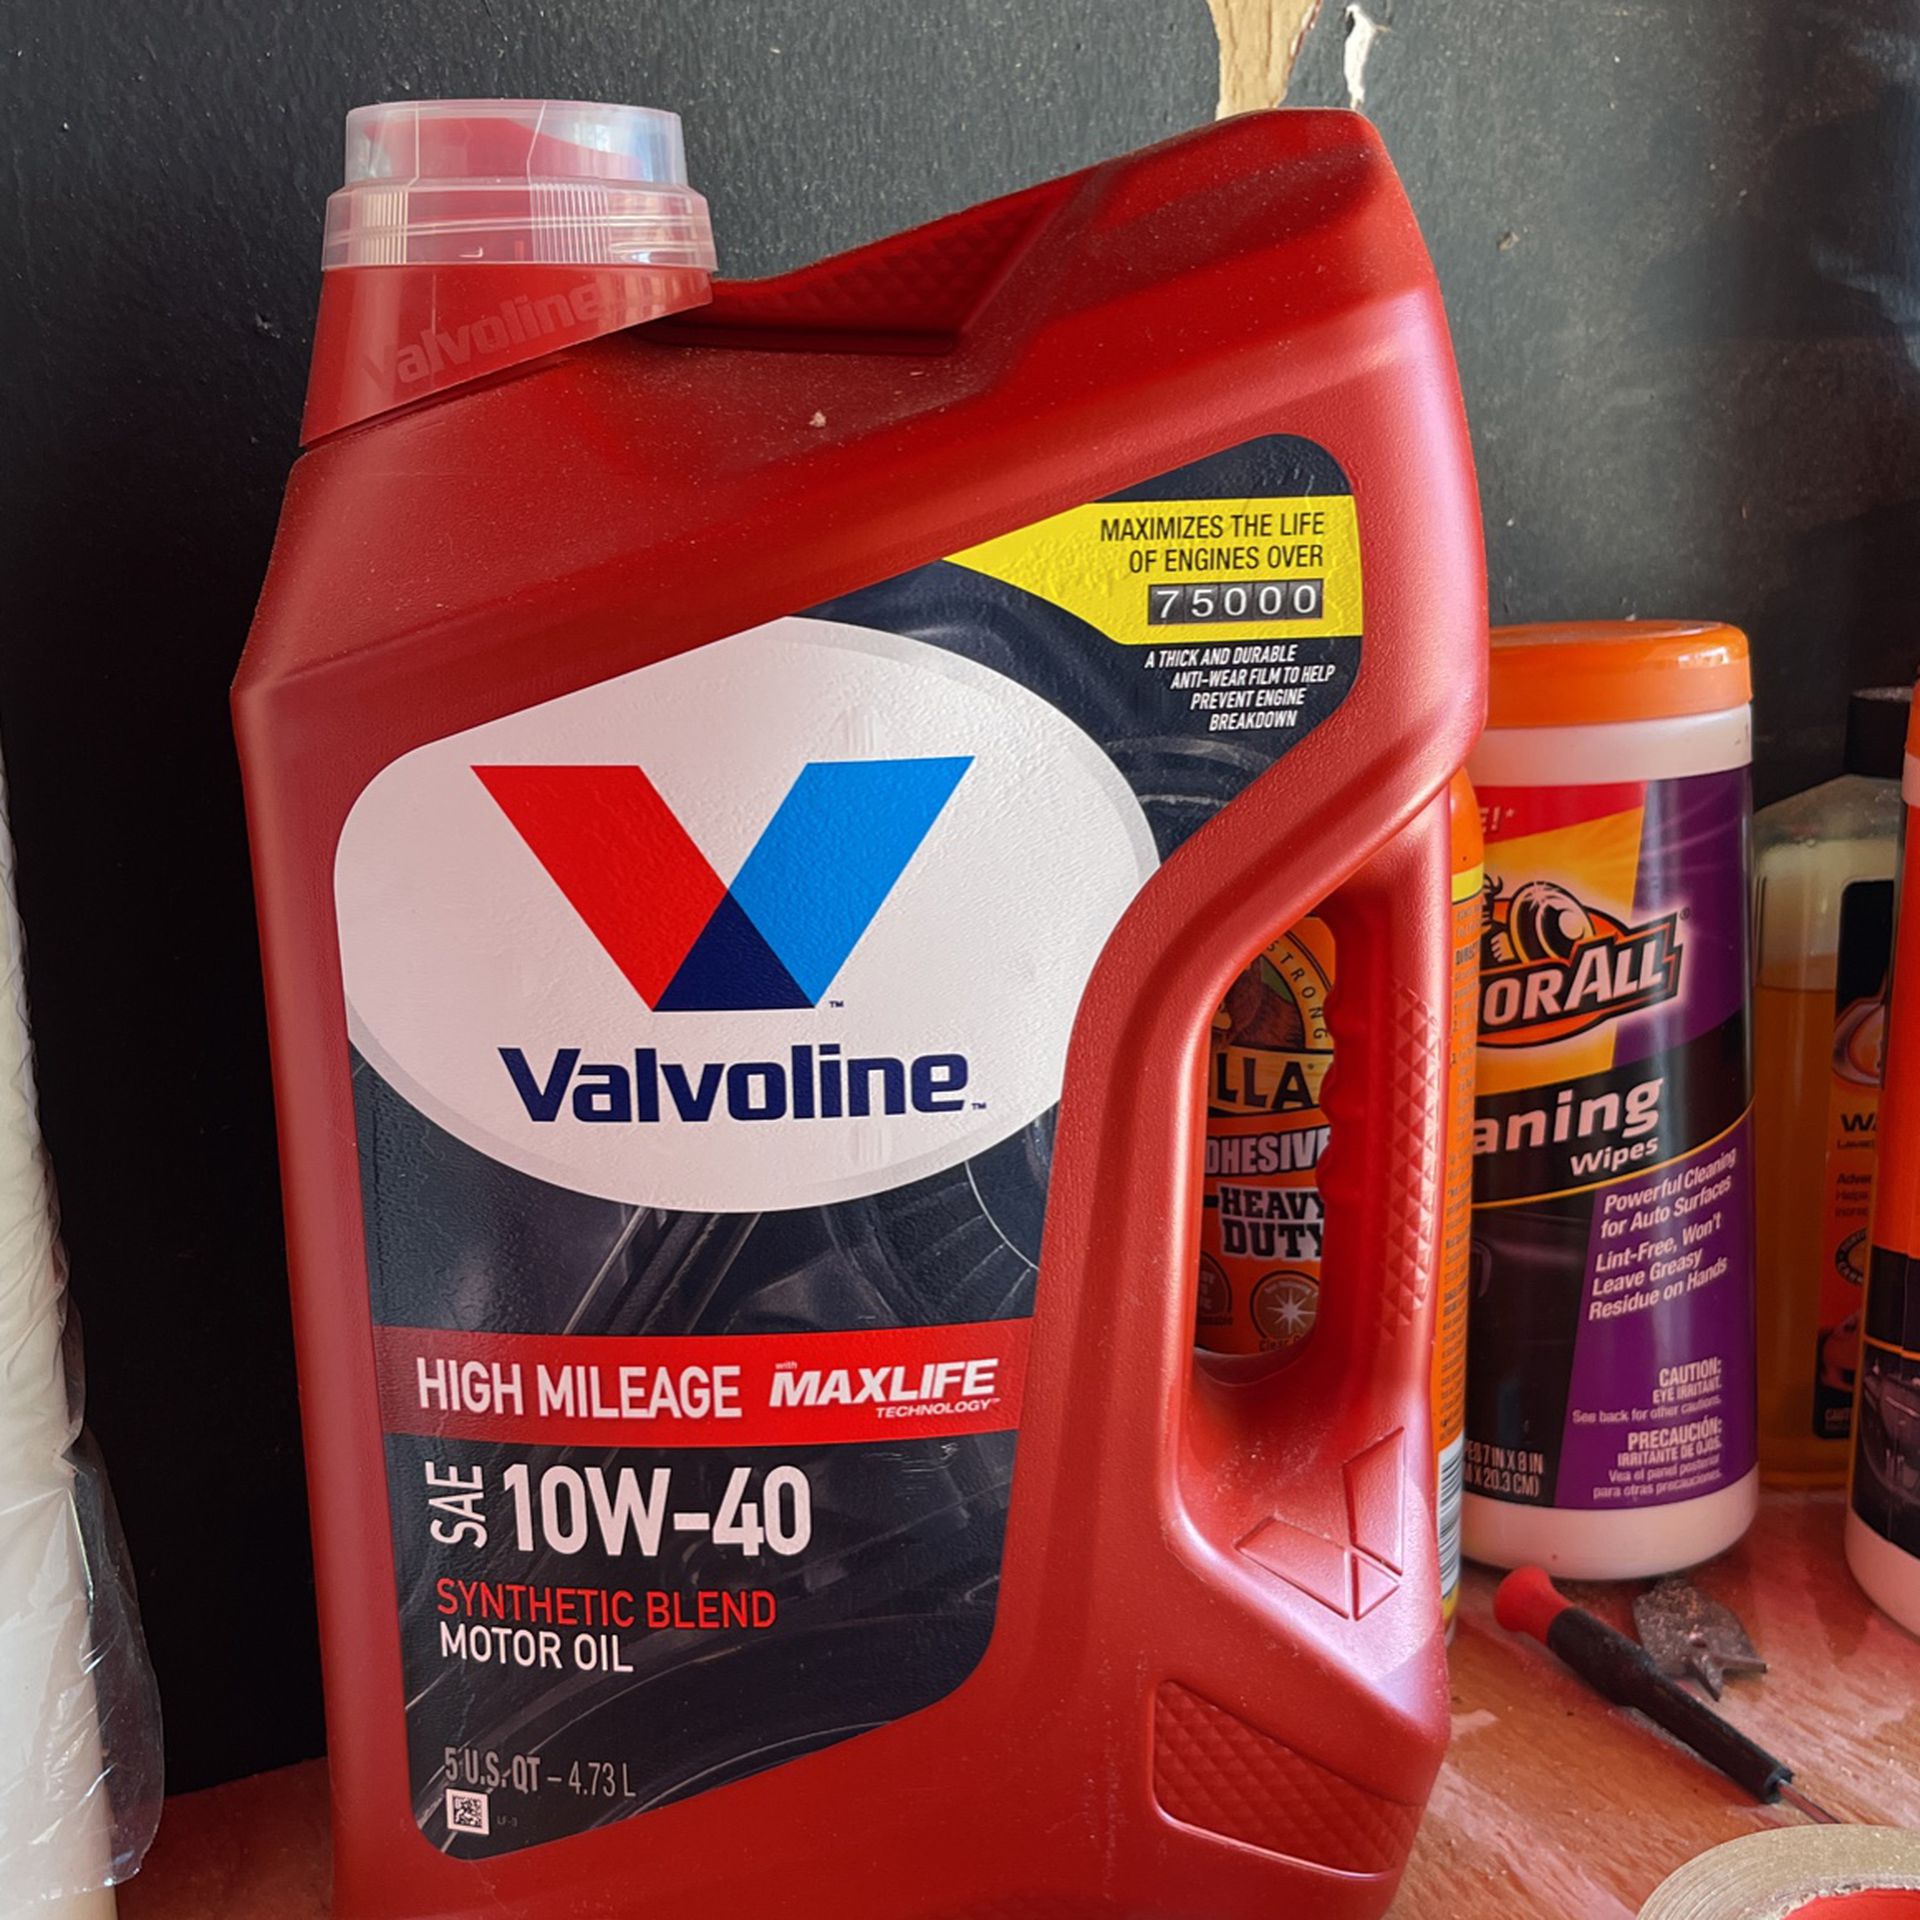 Valvoline 10W-40 for Sale in Chino Hills, CA - OfferUp